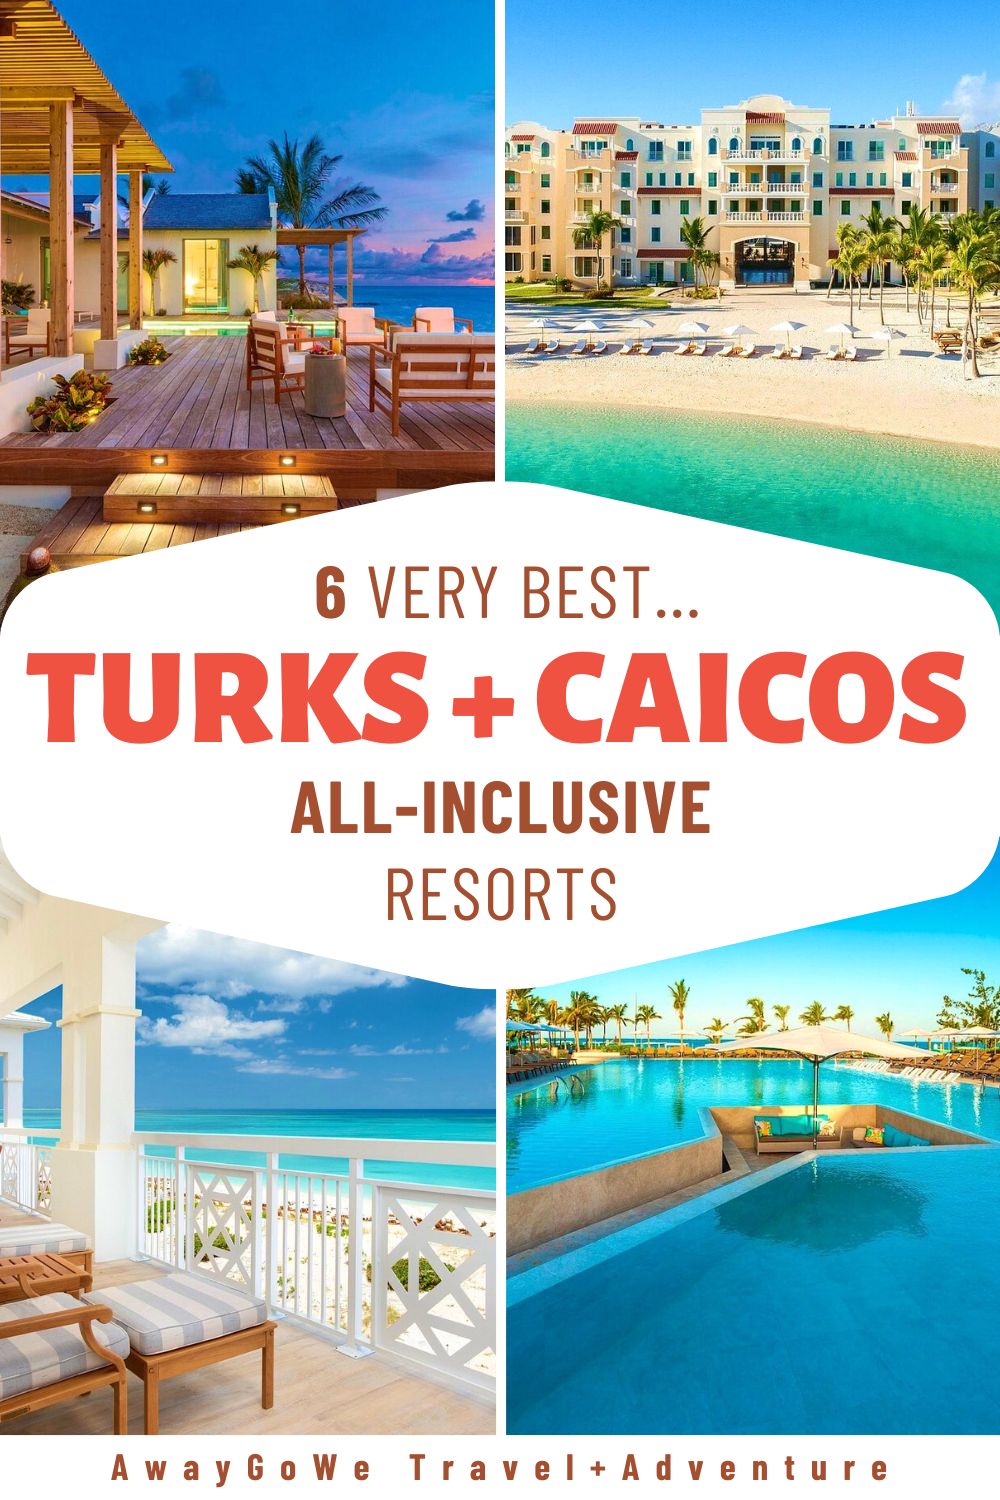 Turks and Caicos all-inclusive resorts